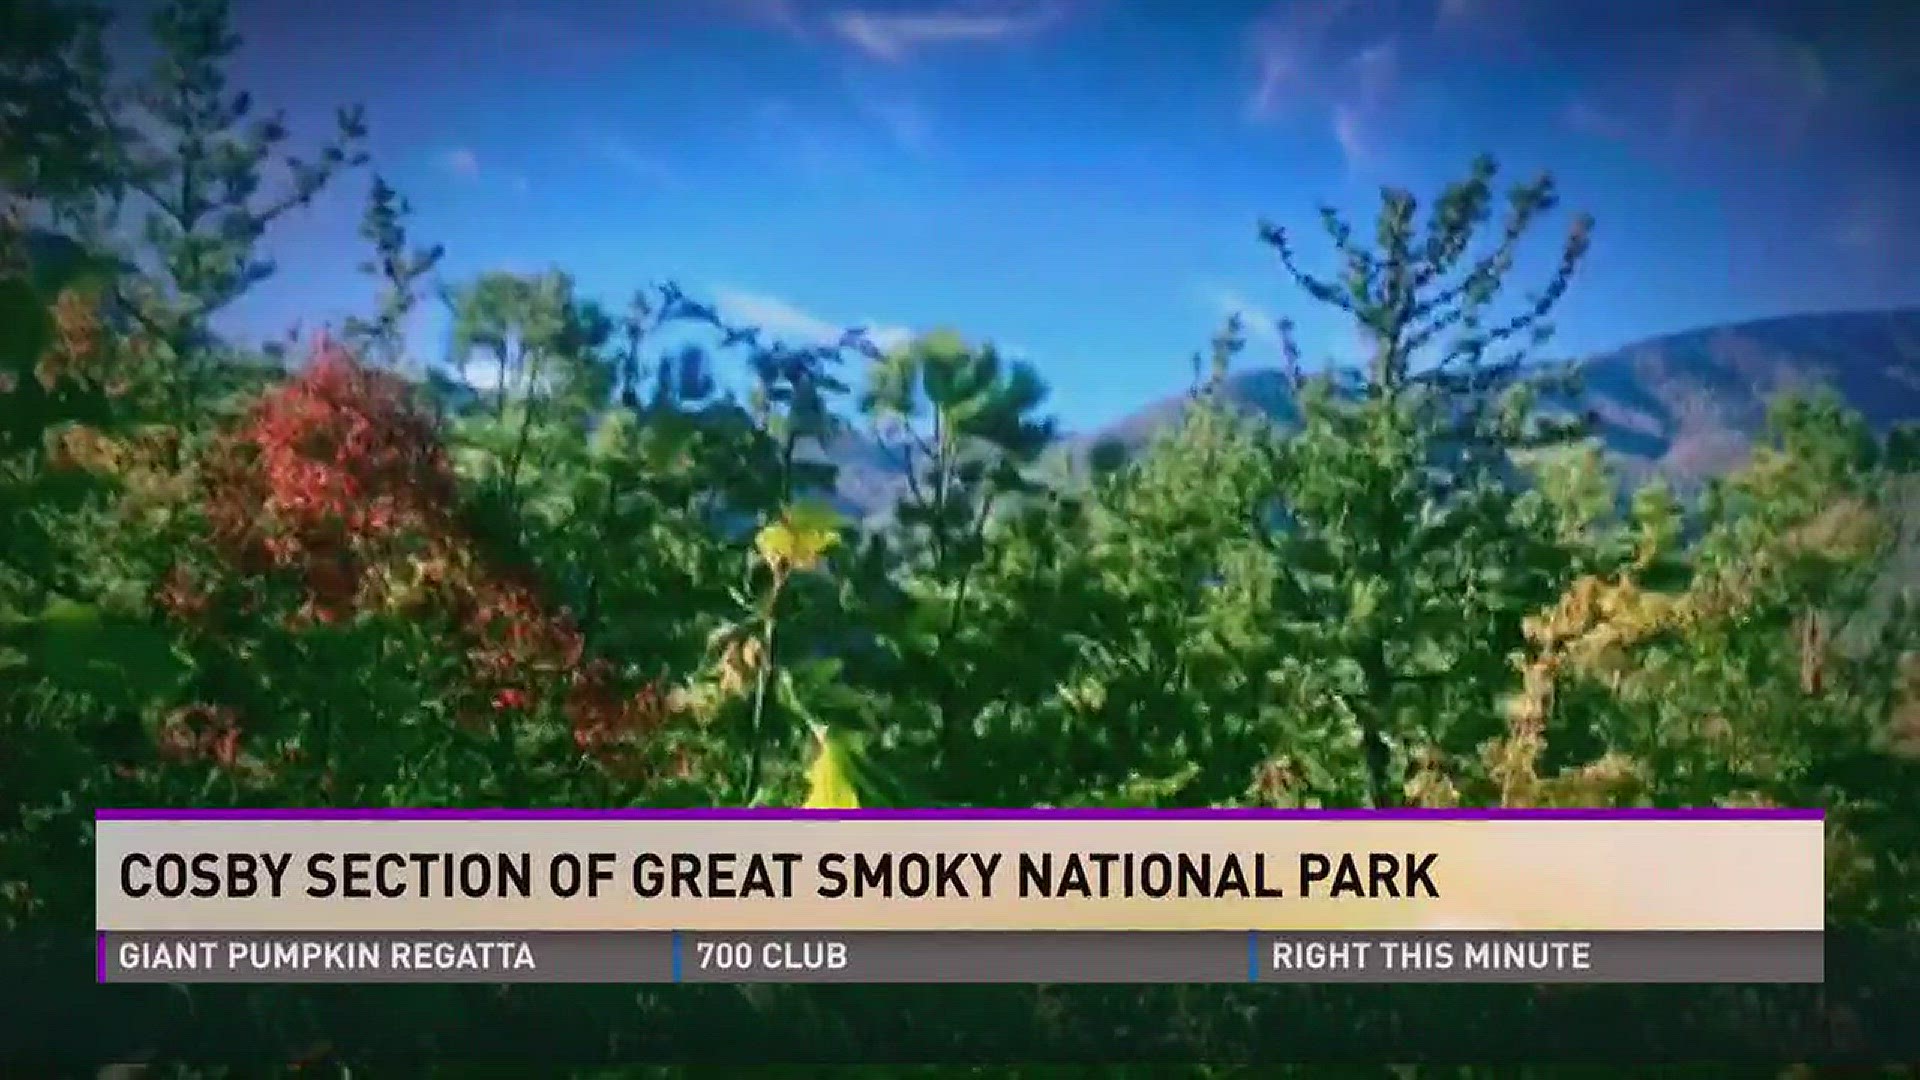 Missy Kane explores the Cosby section of the Great Smoky National Park.